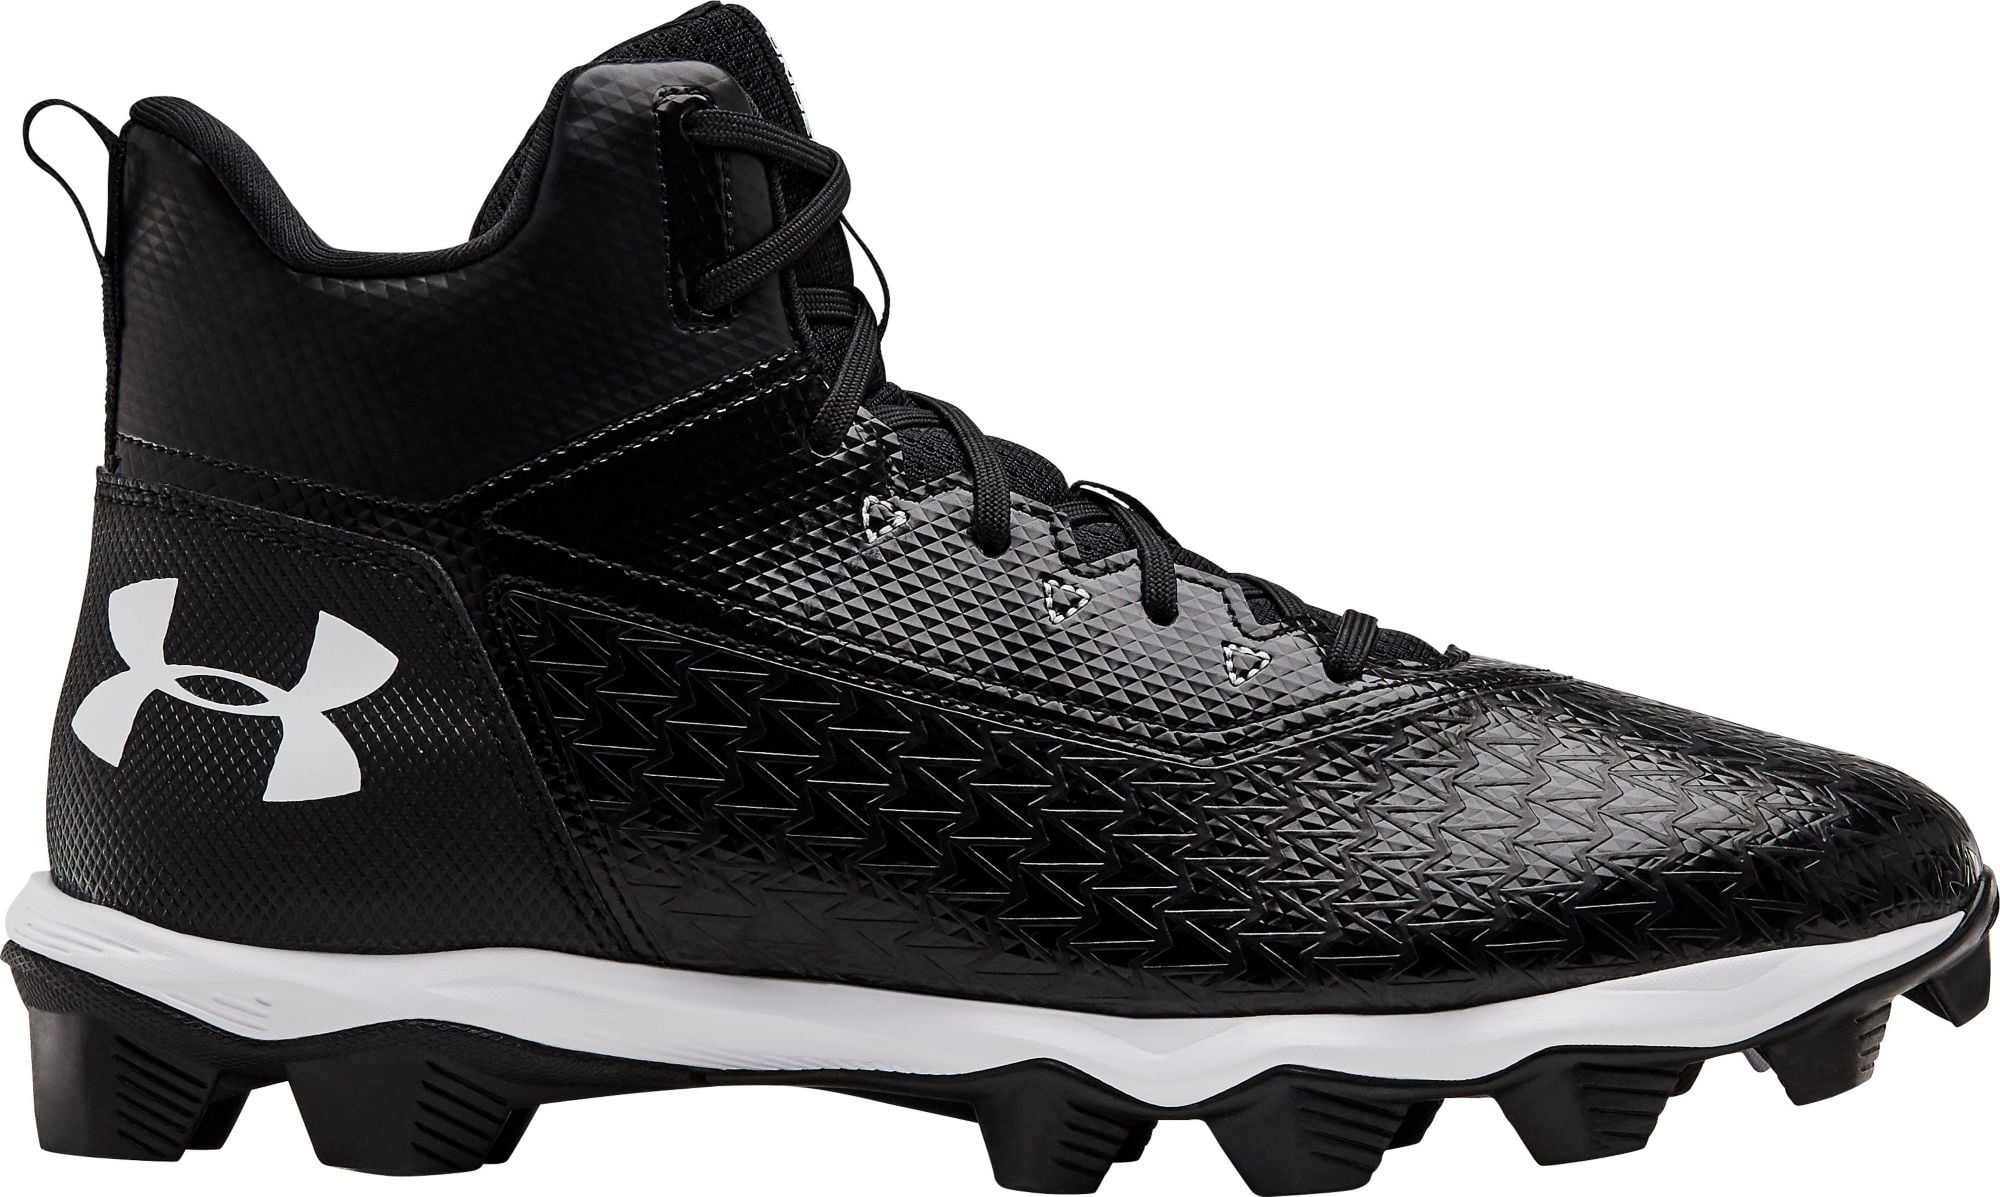 Under Armour Hammer Rubber Men's Football Cleats $50 MSRP 